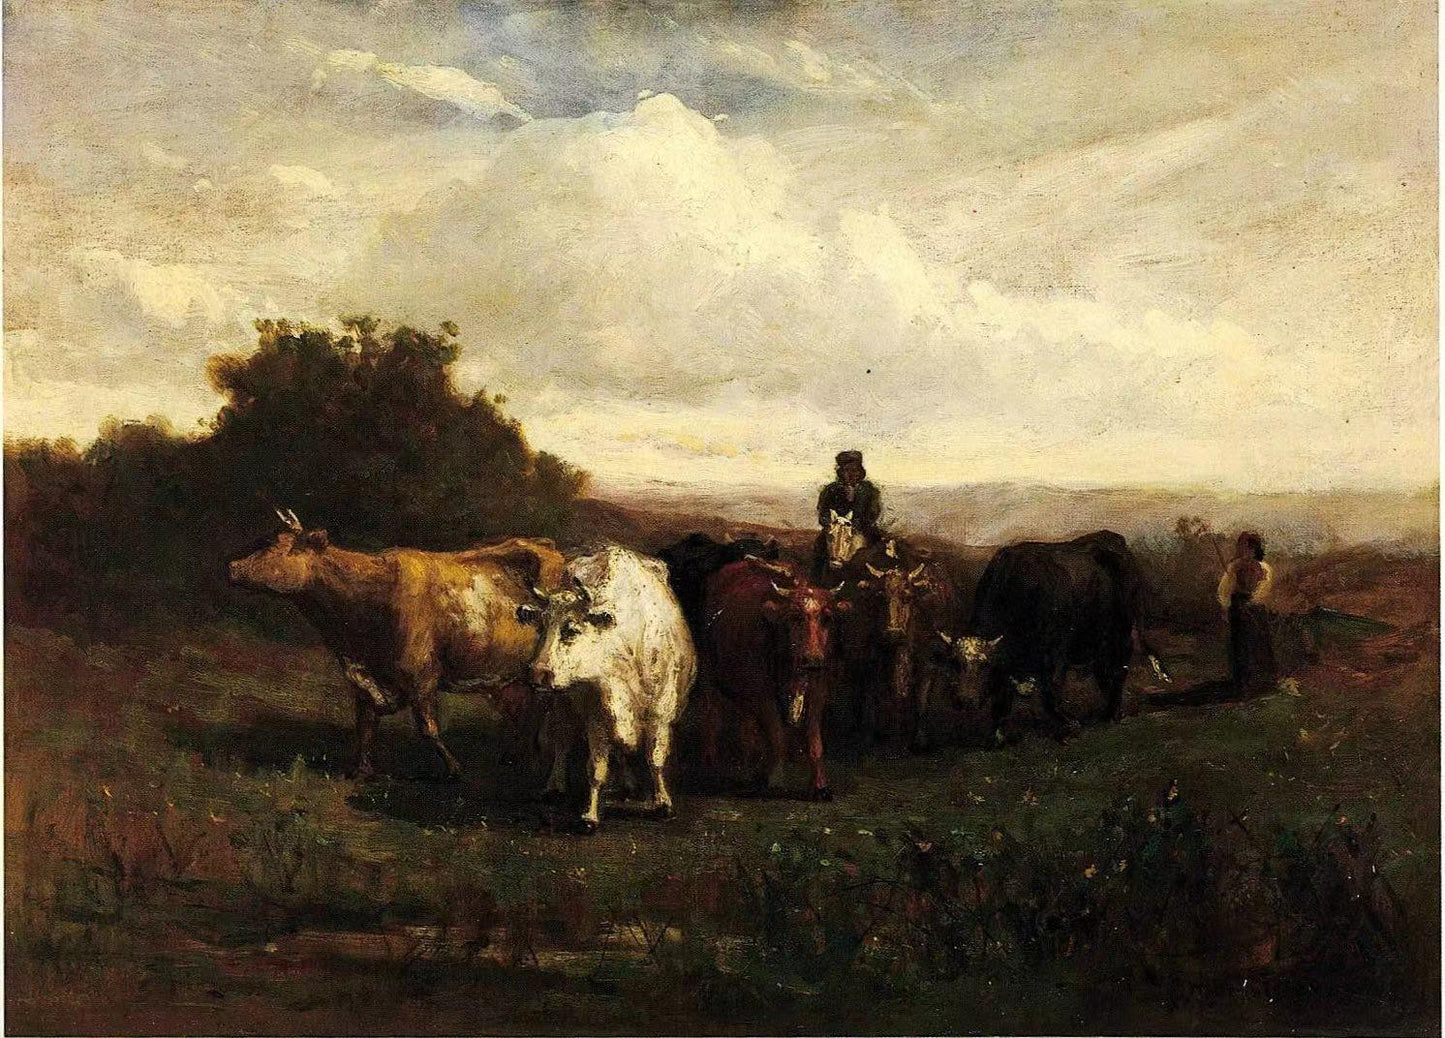 Woman on Foot Driving Cattle,Edward Mitchell Bannister,1828-1901